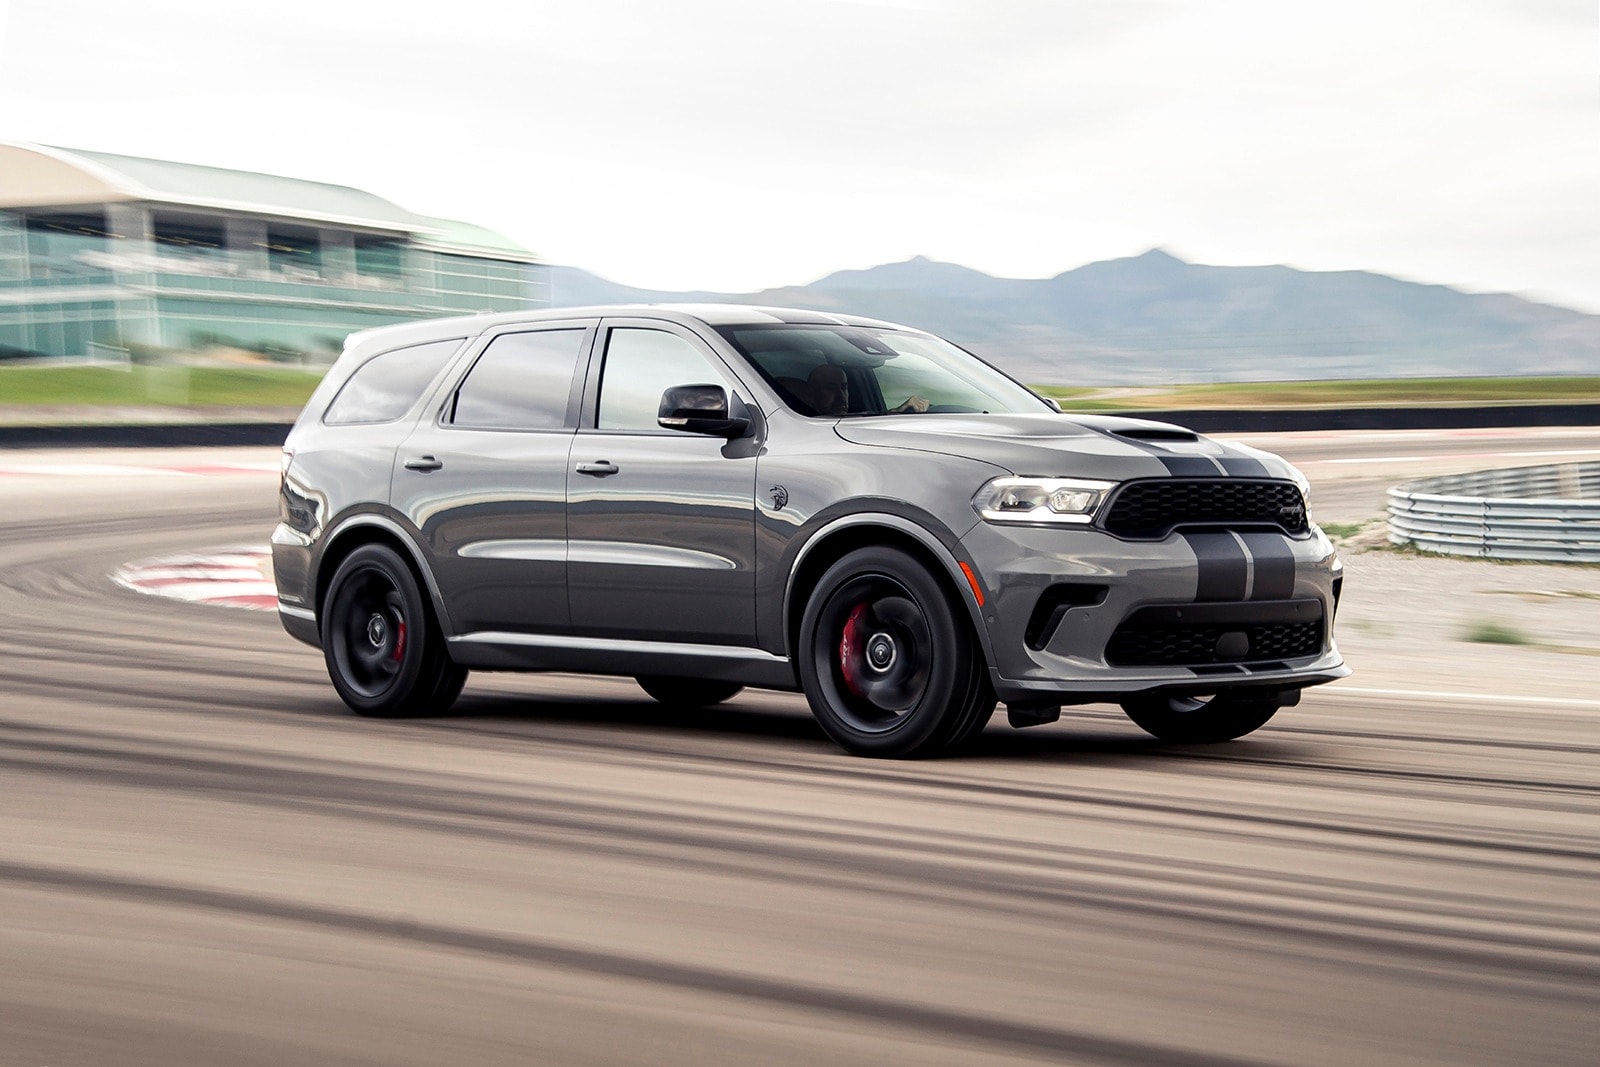 TESTED: The 2021 Dodge Durango SRT Hellcat Is a Seriously Fast SUV